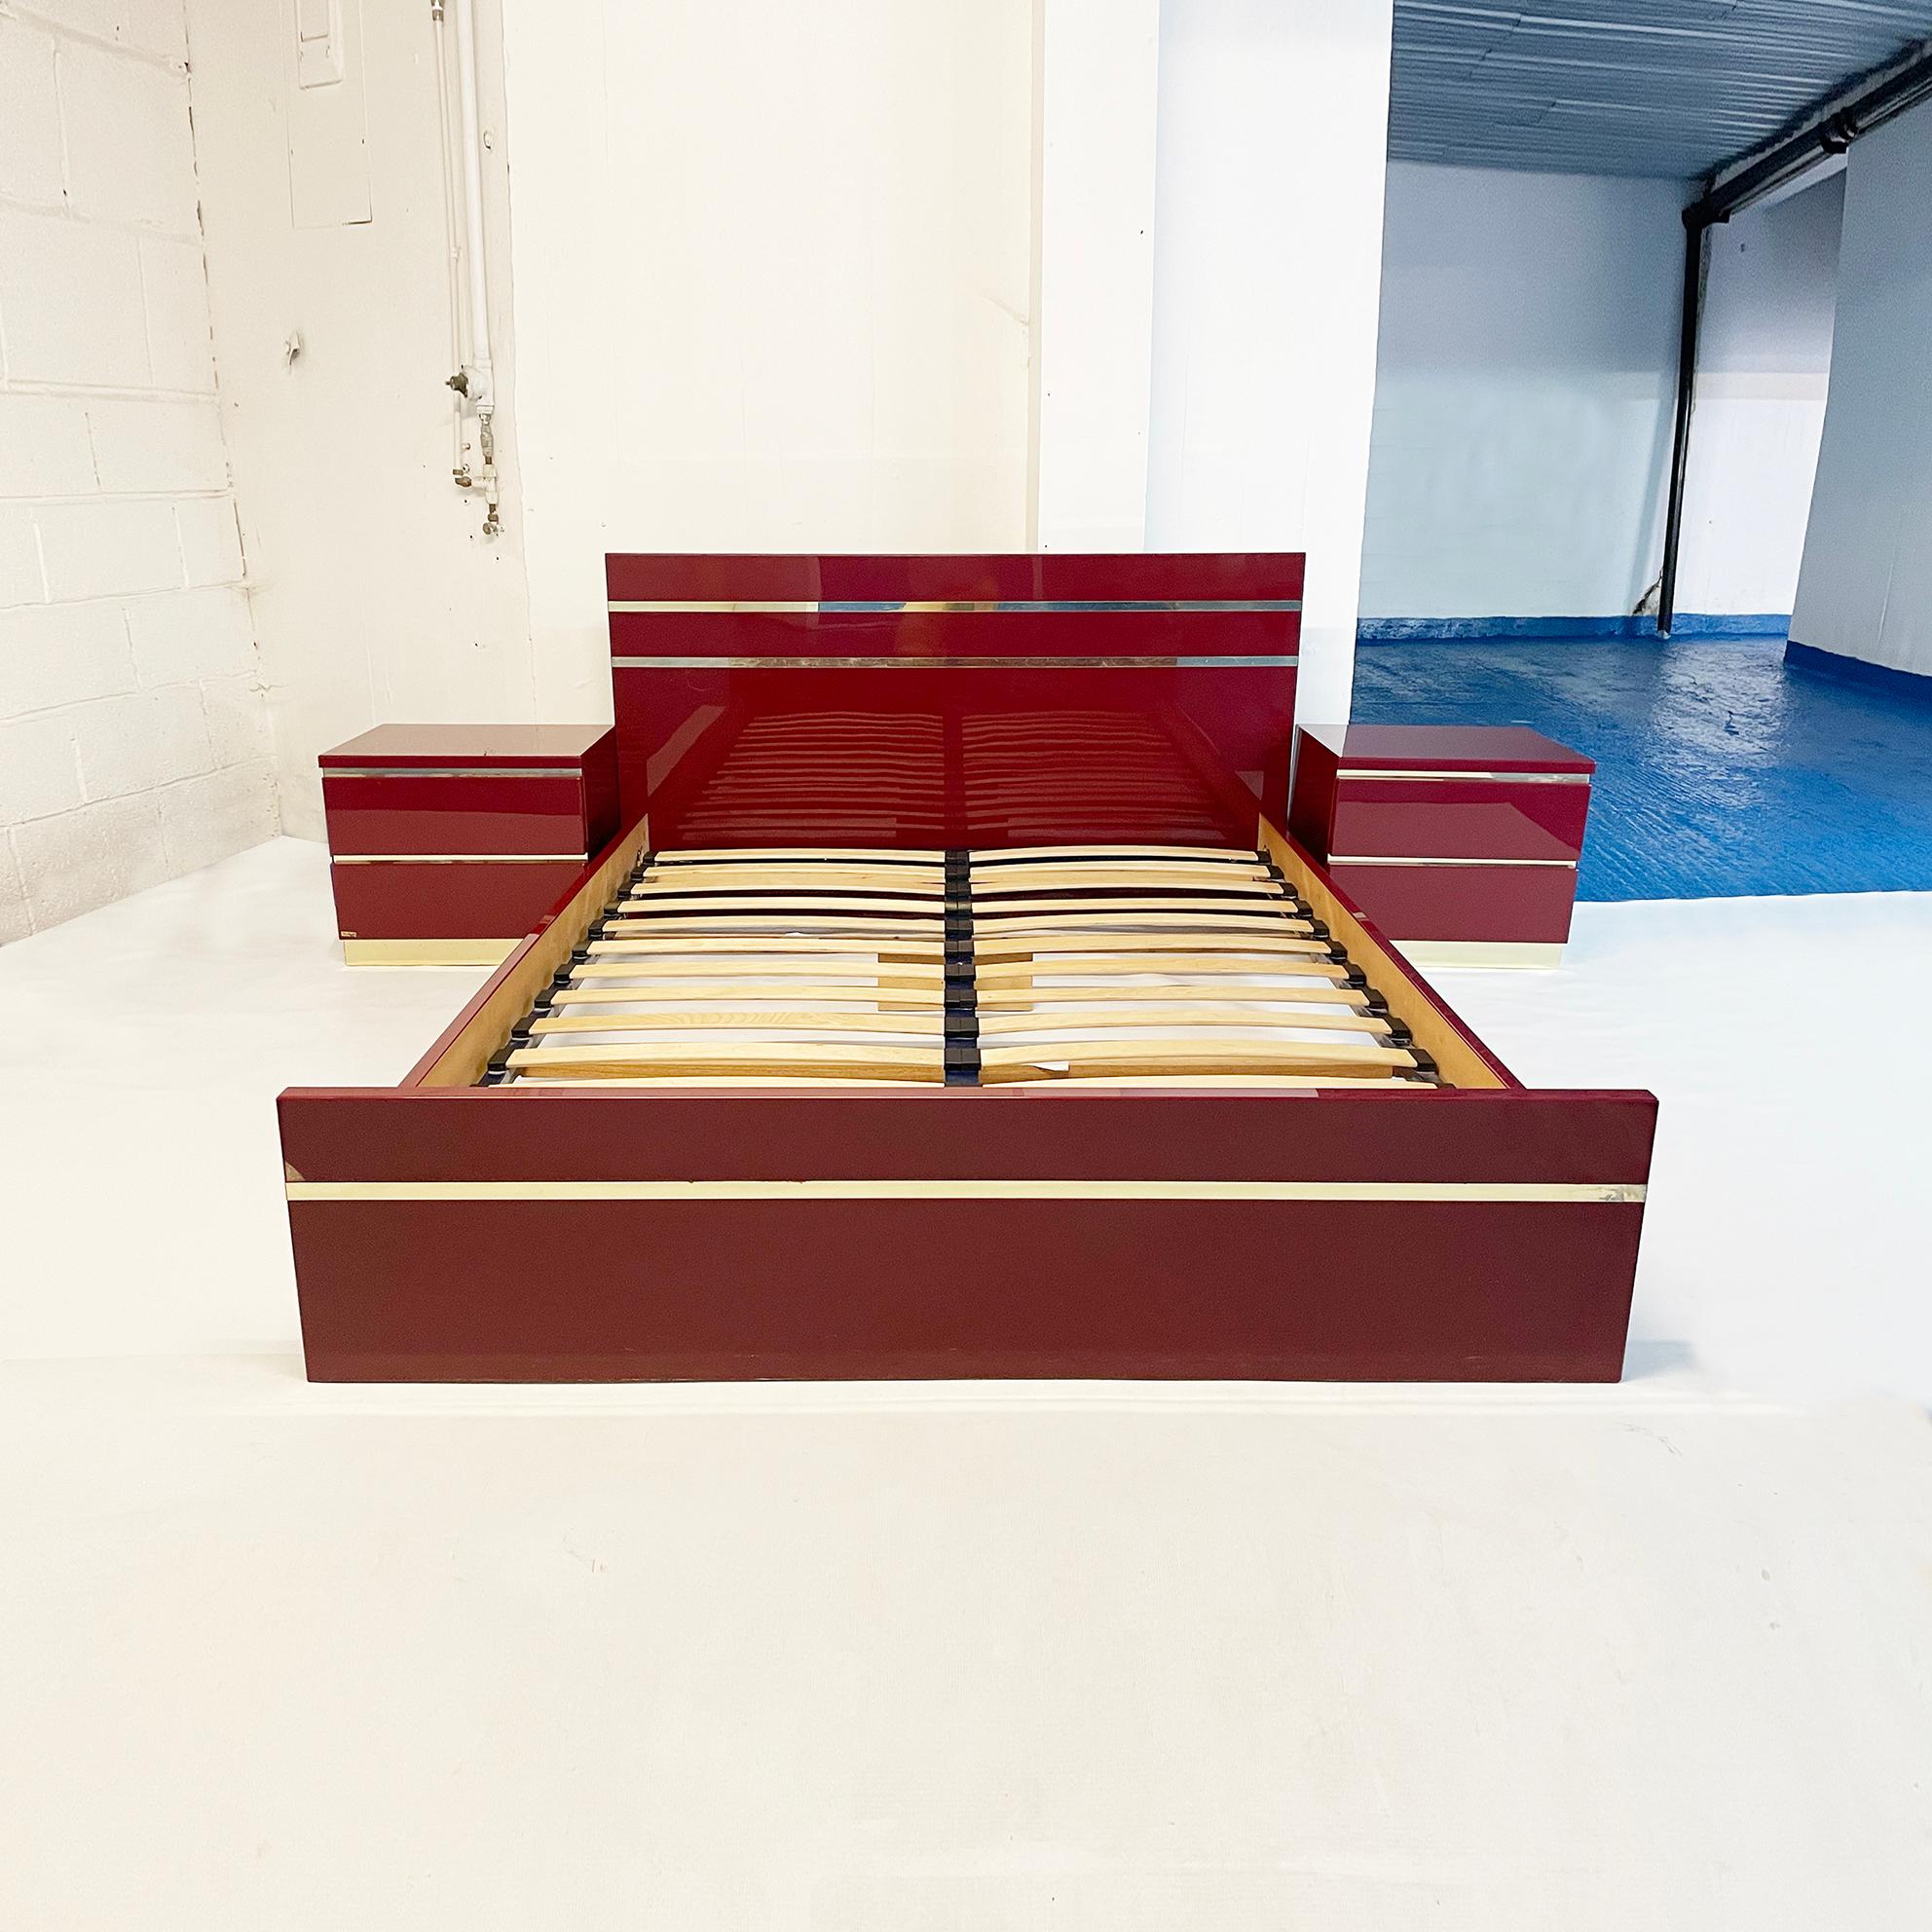 An exquisite bedroom set by the French 1970s designer Eric Maville in deep burgundy and brass. This signed French import consists of a pair of bedside tables, and a double bed in burgundy acrylic with brass trim. The bed comes with wooden double